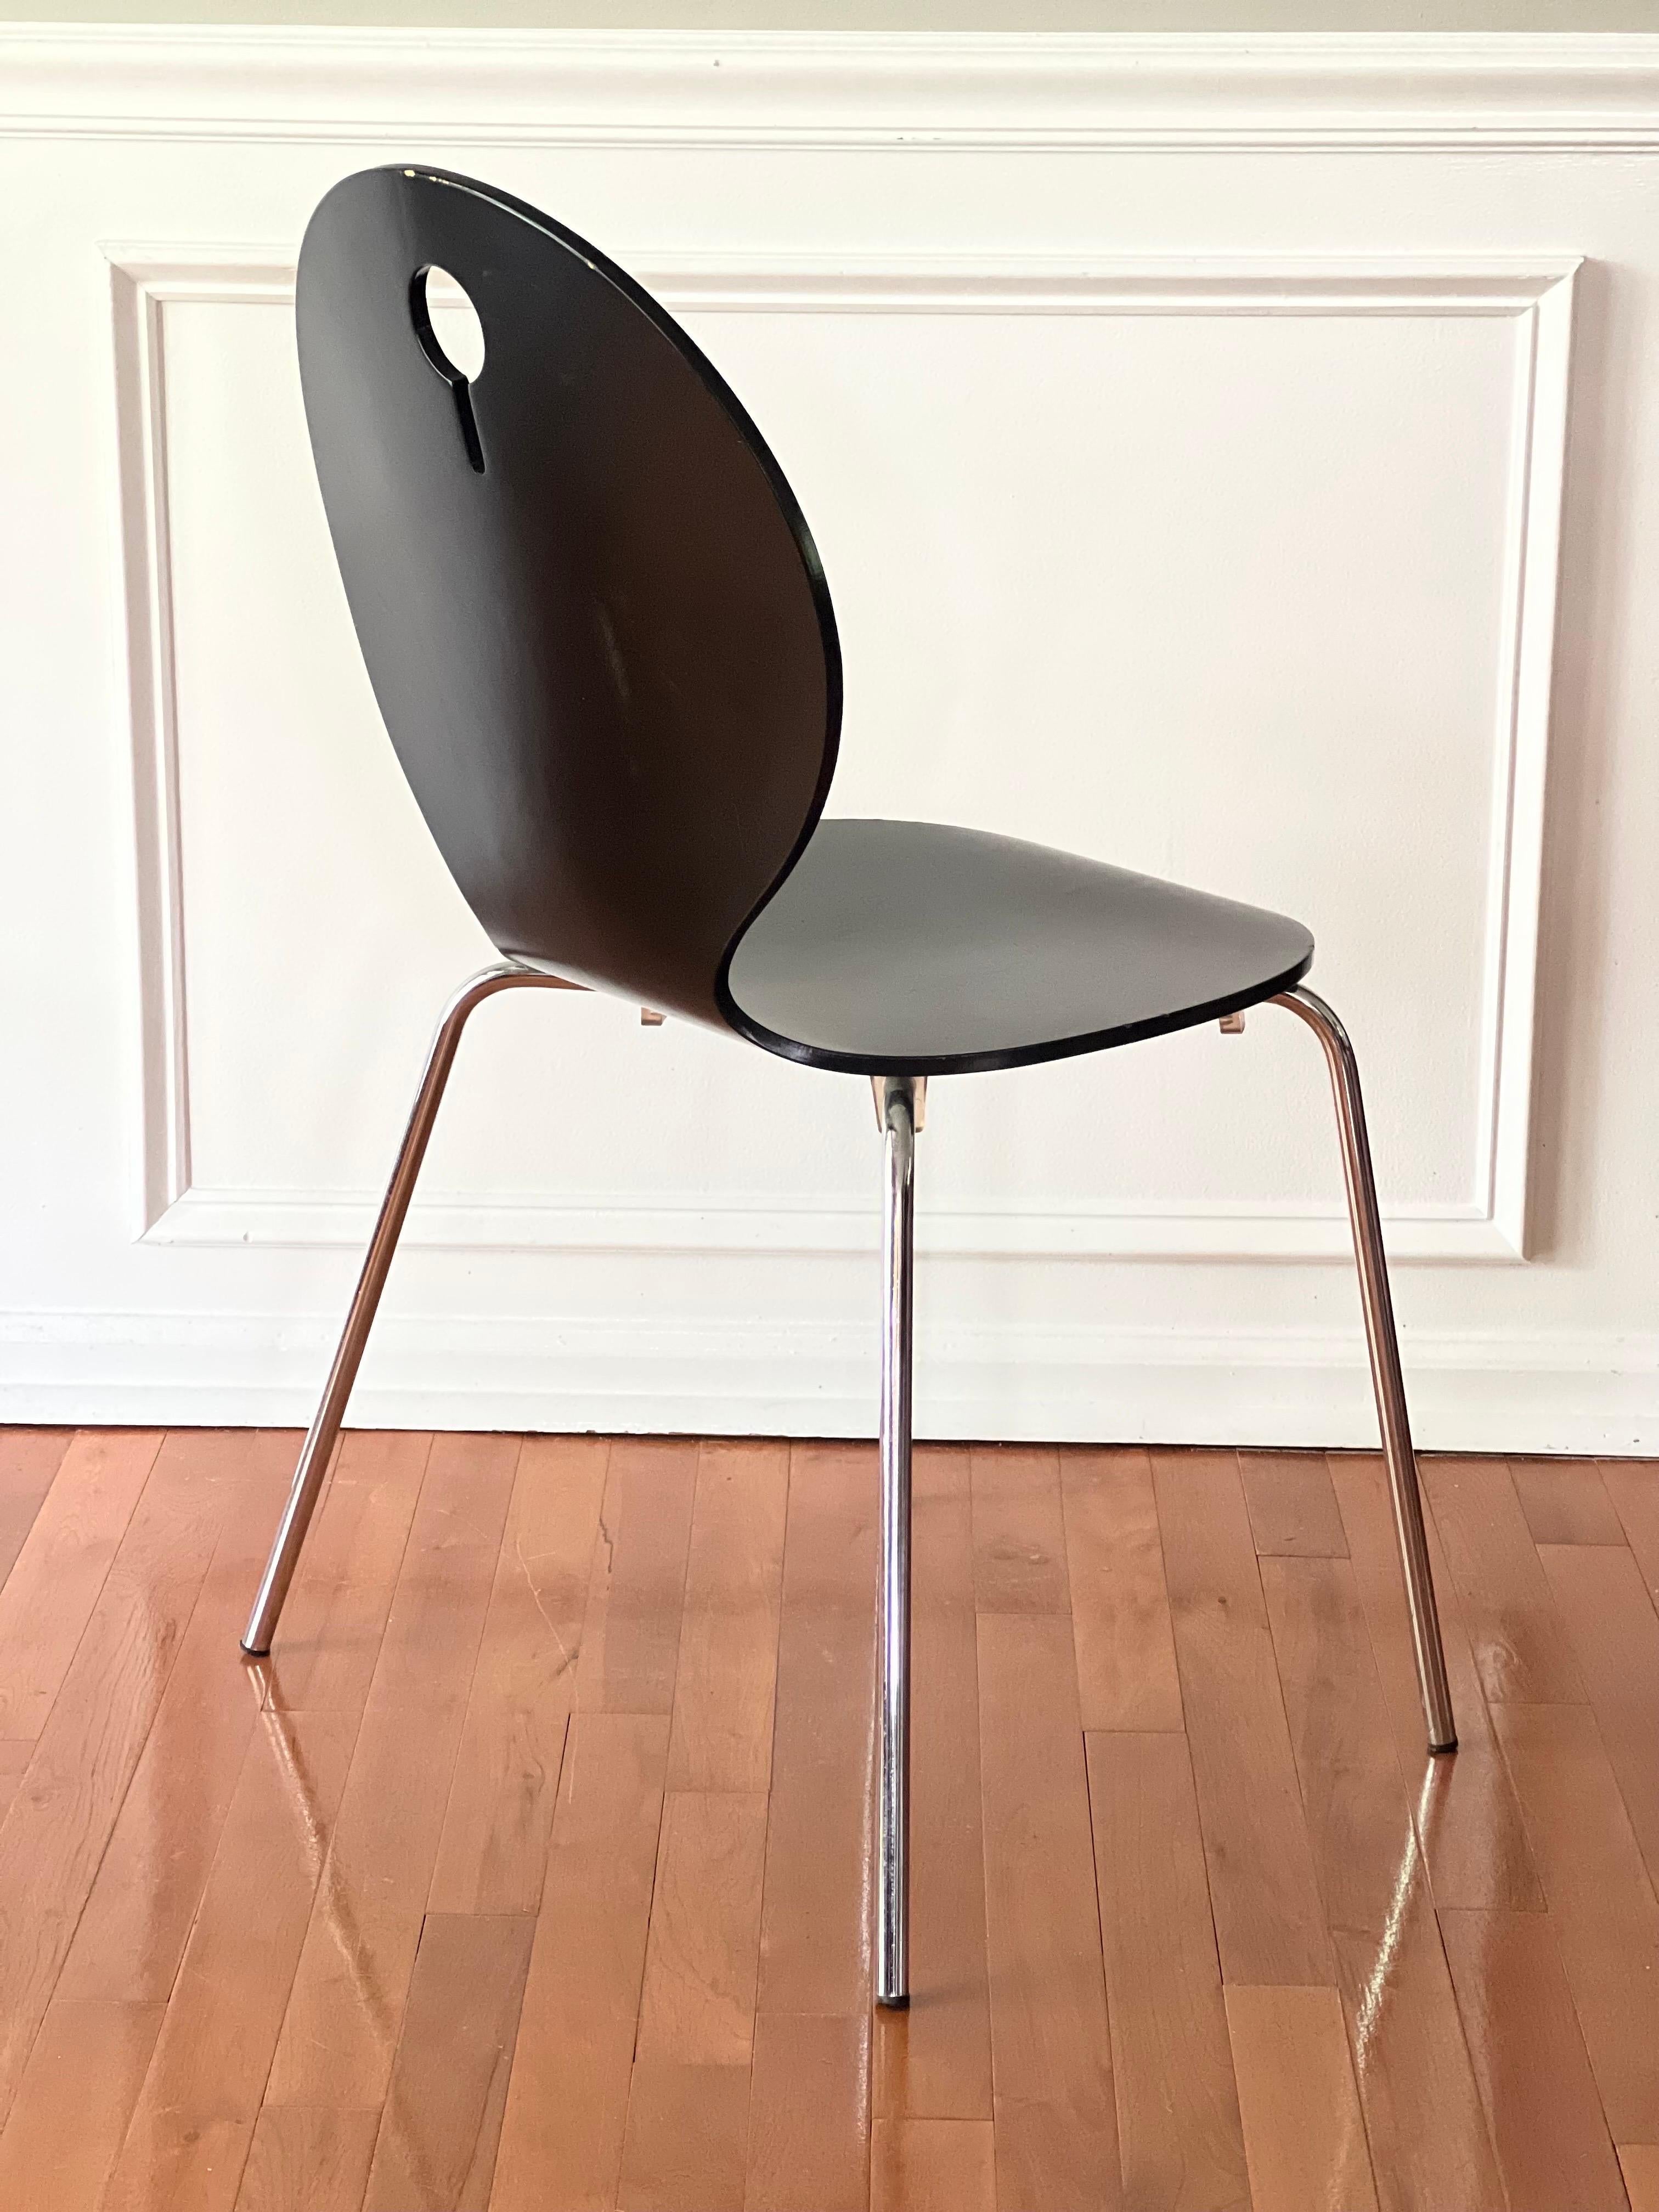 Vintage Italian Modern Bentwood Stackable Chairs by Calligaris, Set of 4 For Sale 2